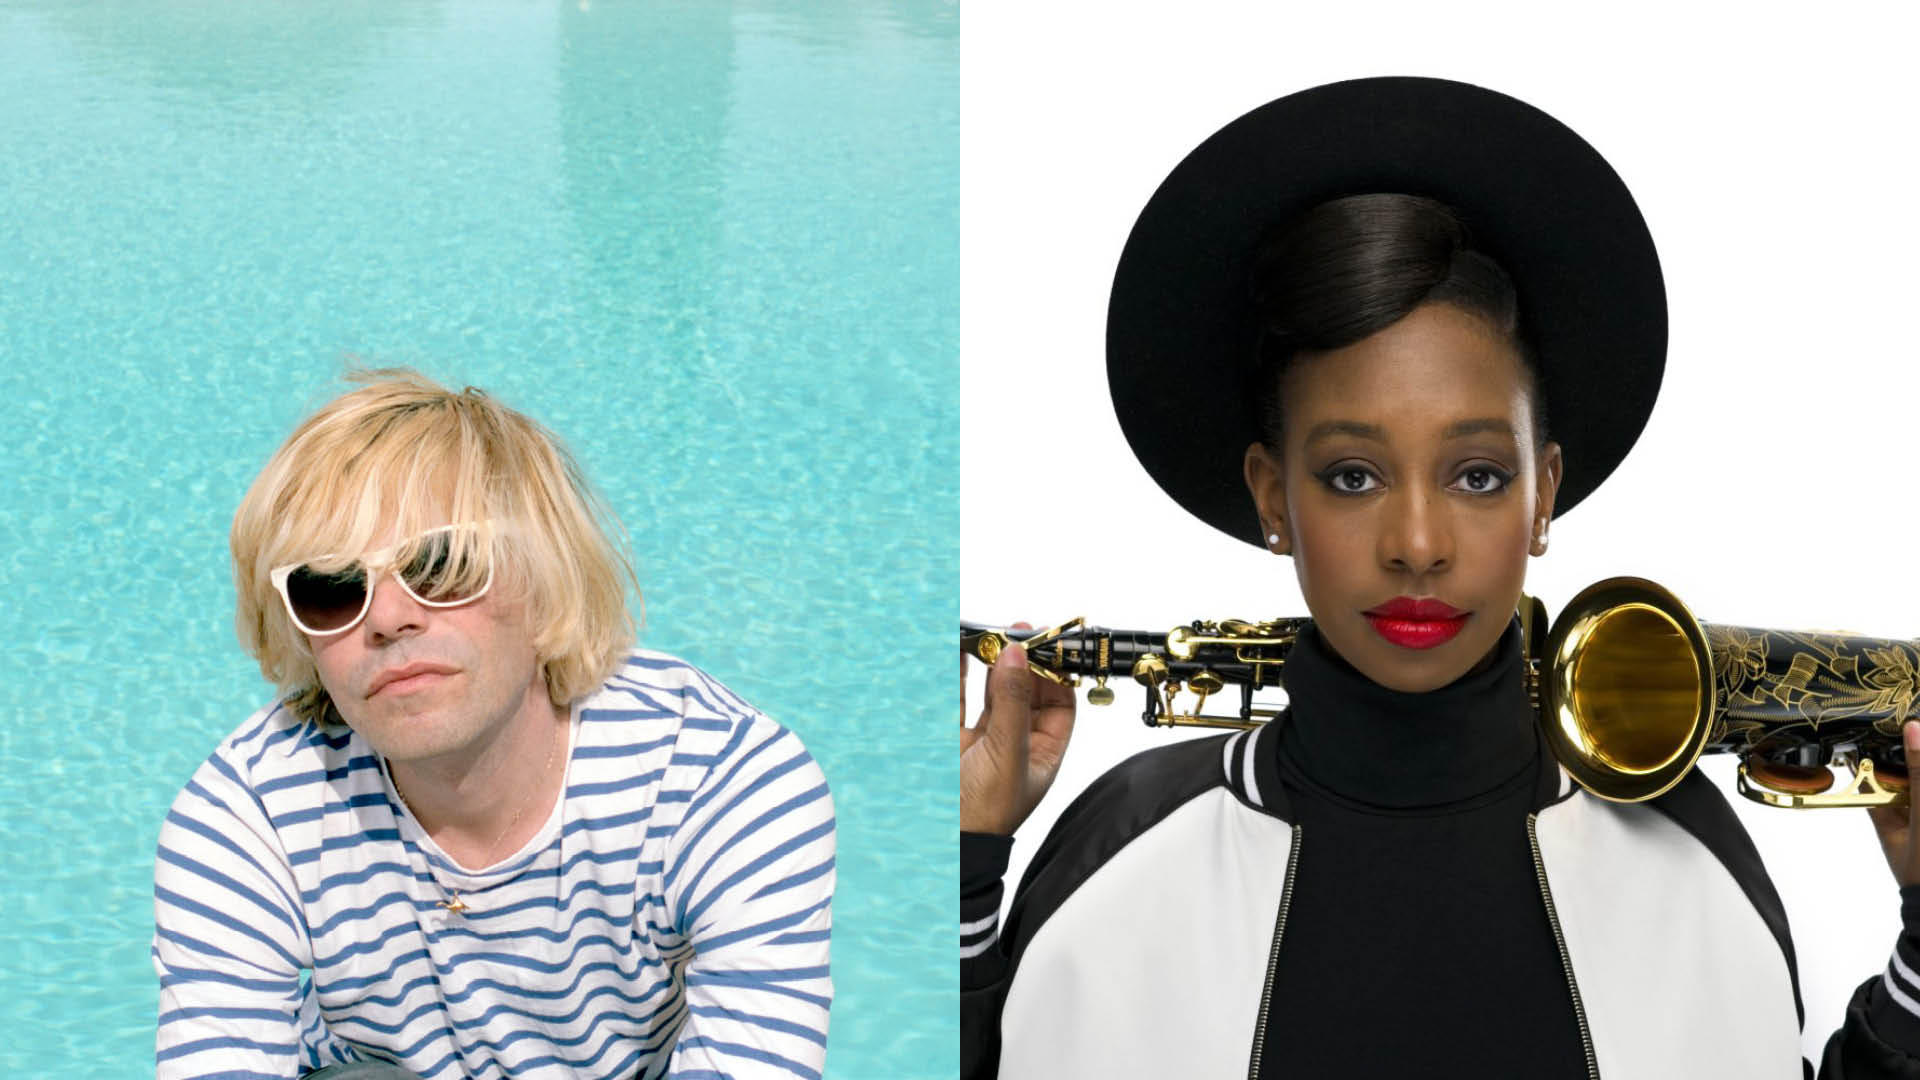 Tim Burgess with sunglass on in front of a pool of water and YolanDa Brown with a black hat holding and saxophone behind her neck 